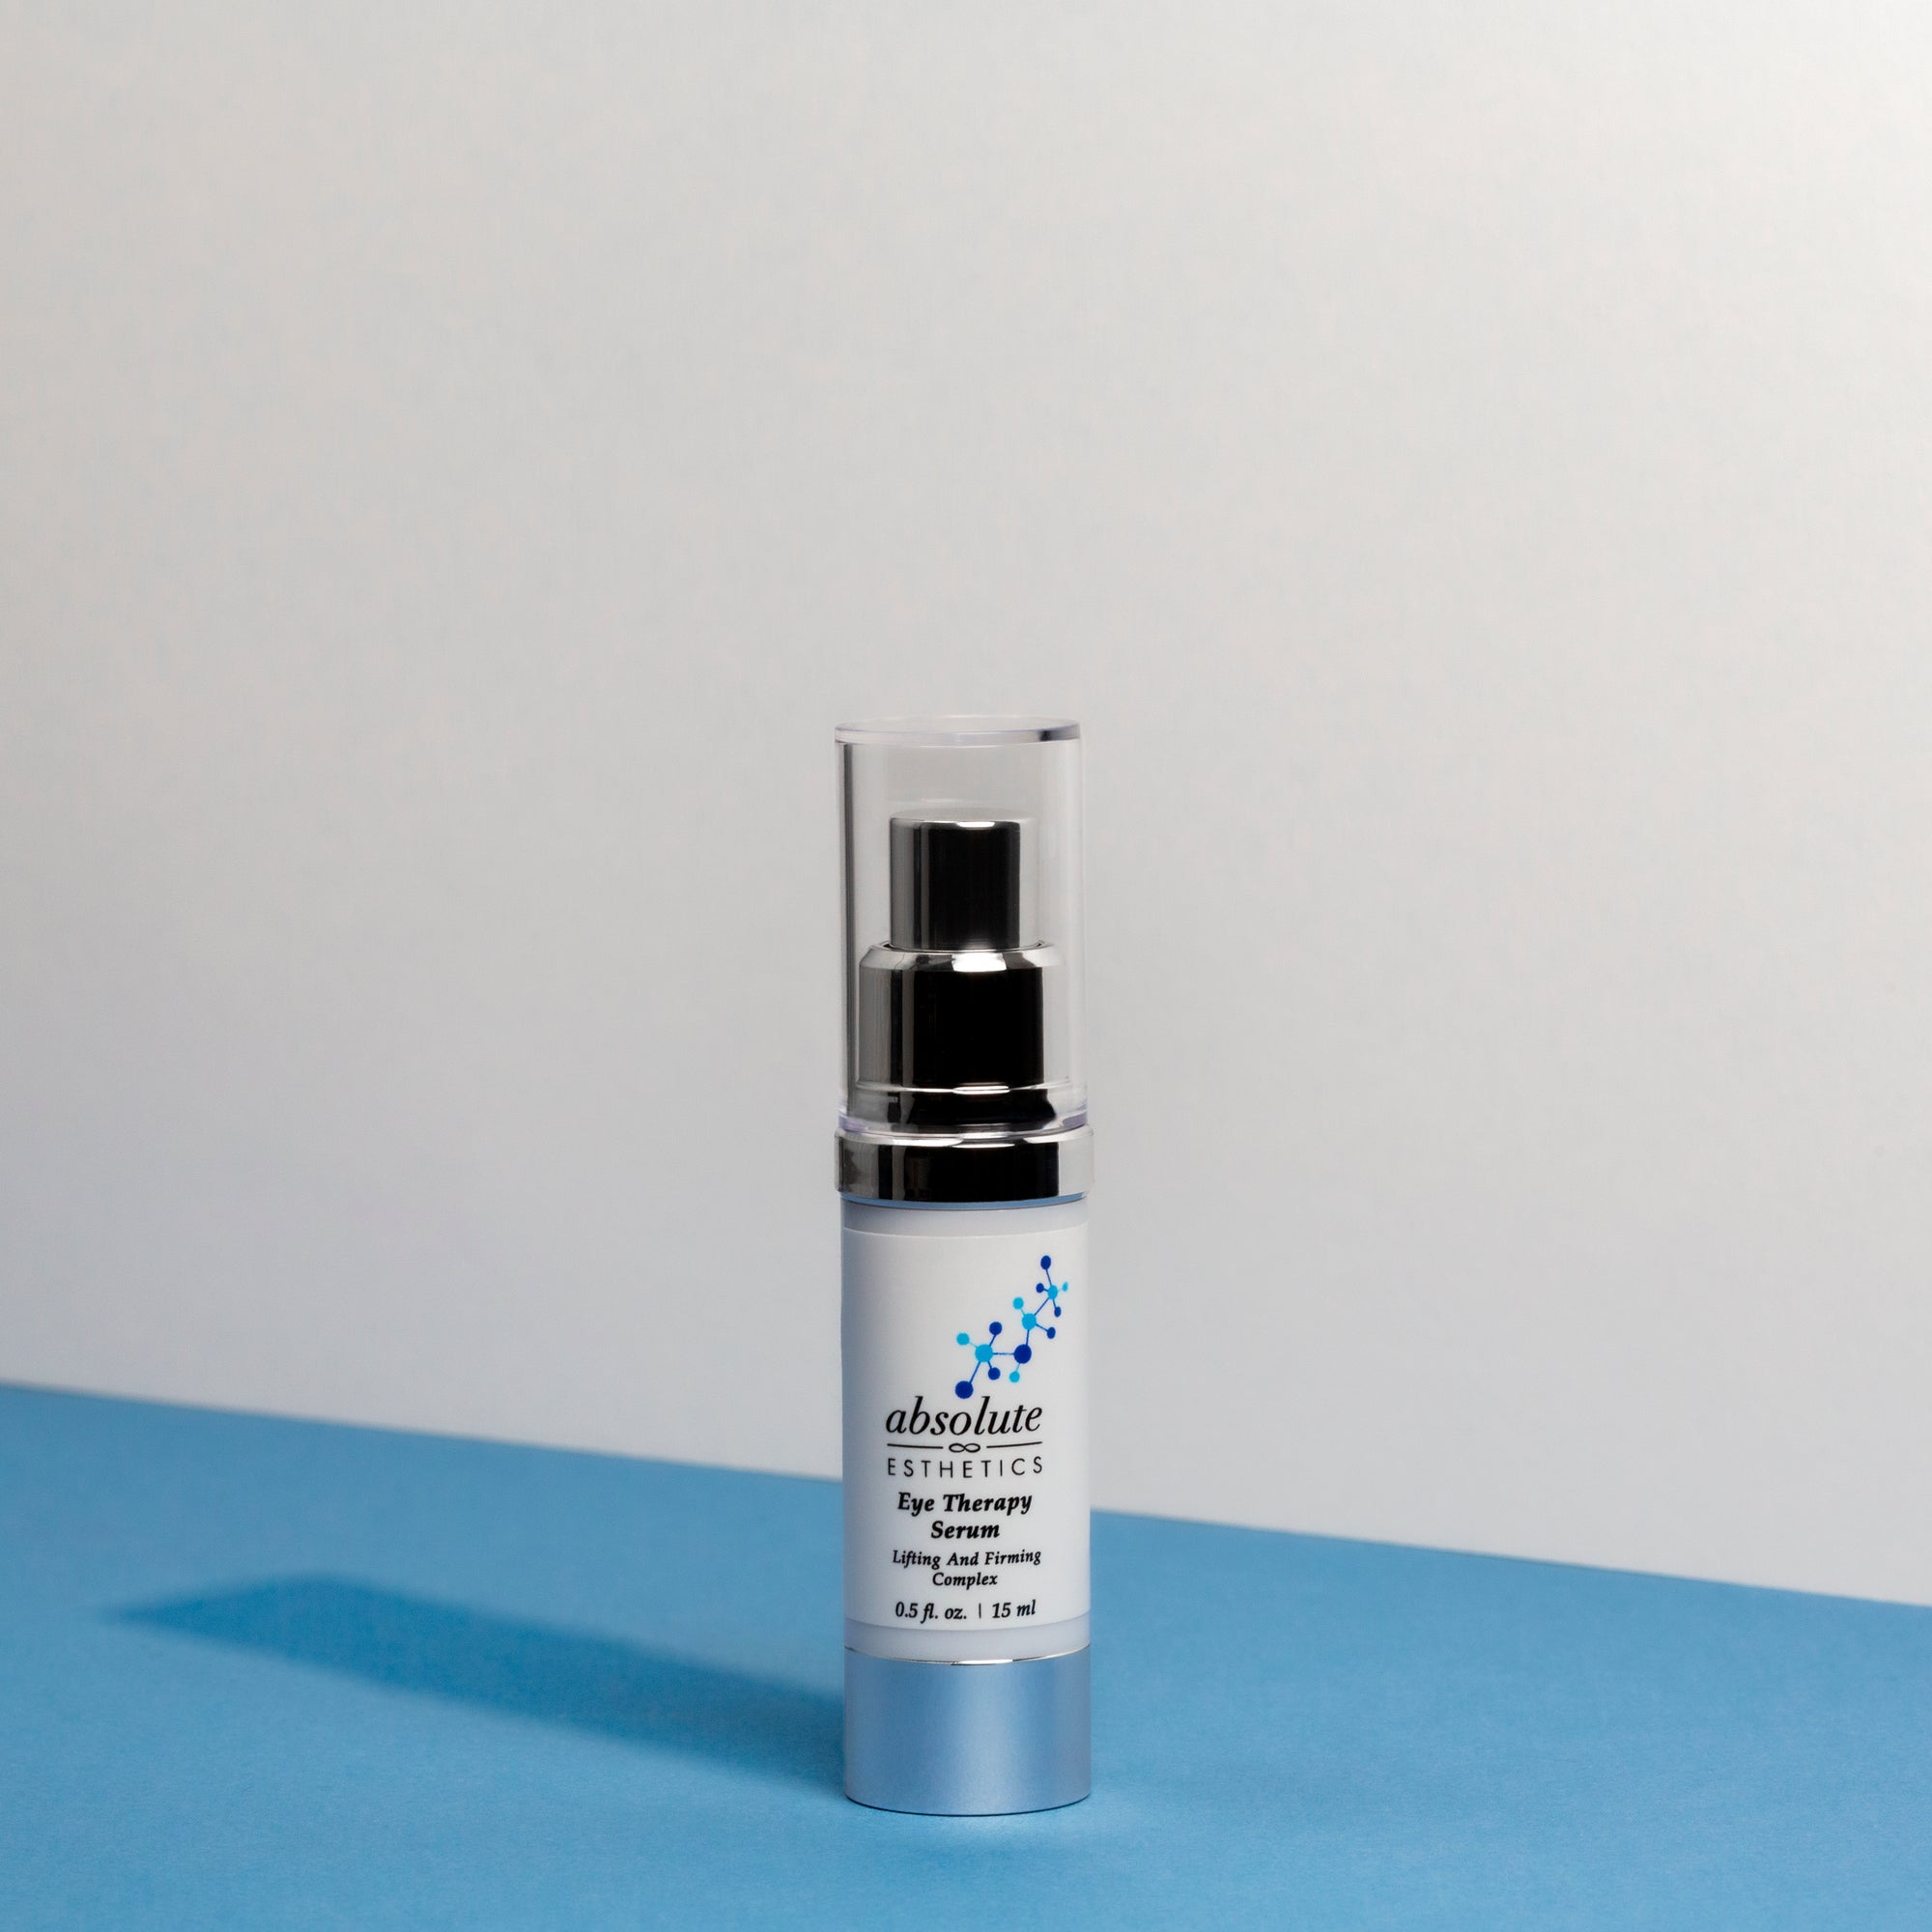 Eye Therapy Serum (Skin Lifting & Firming Complex)